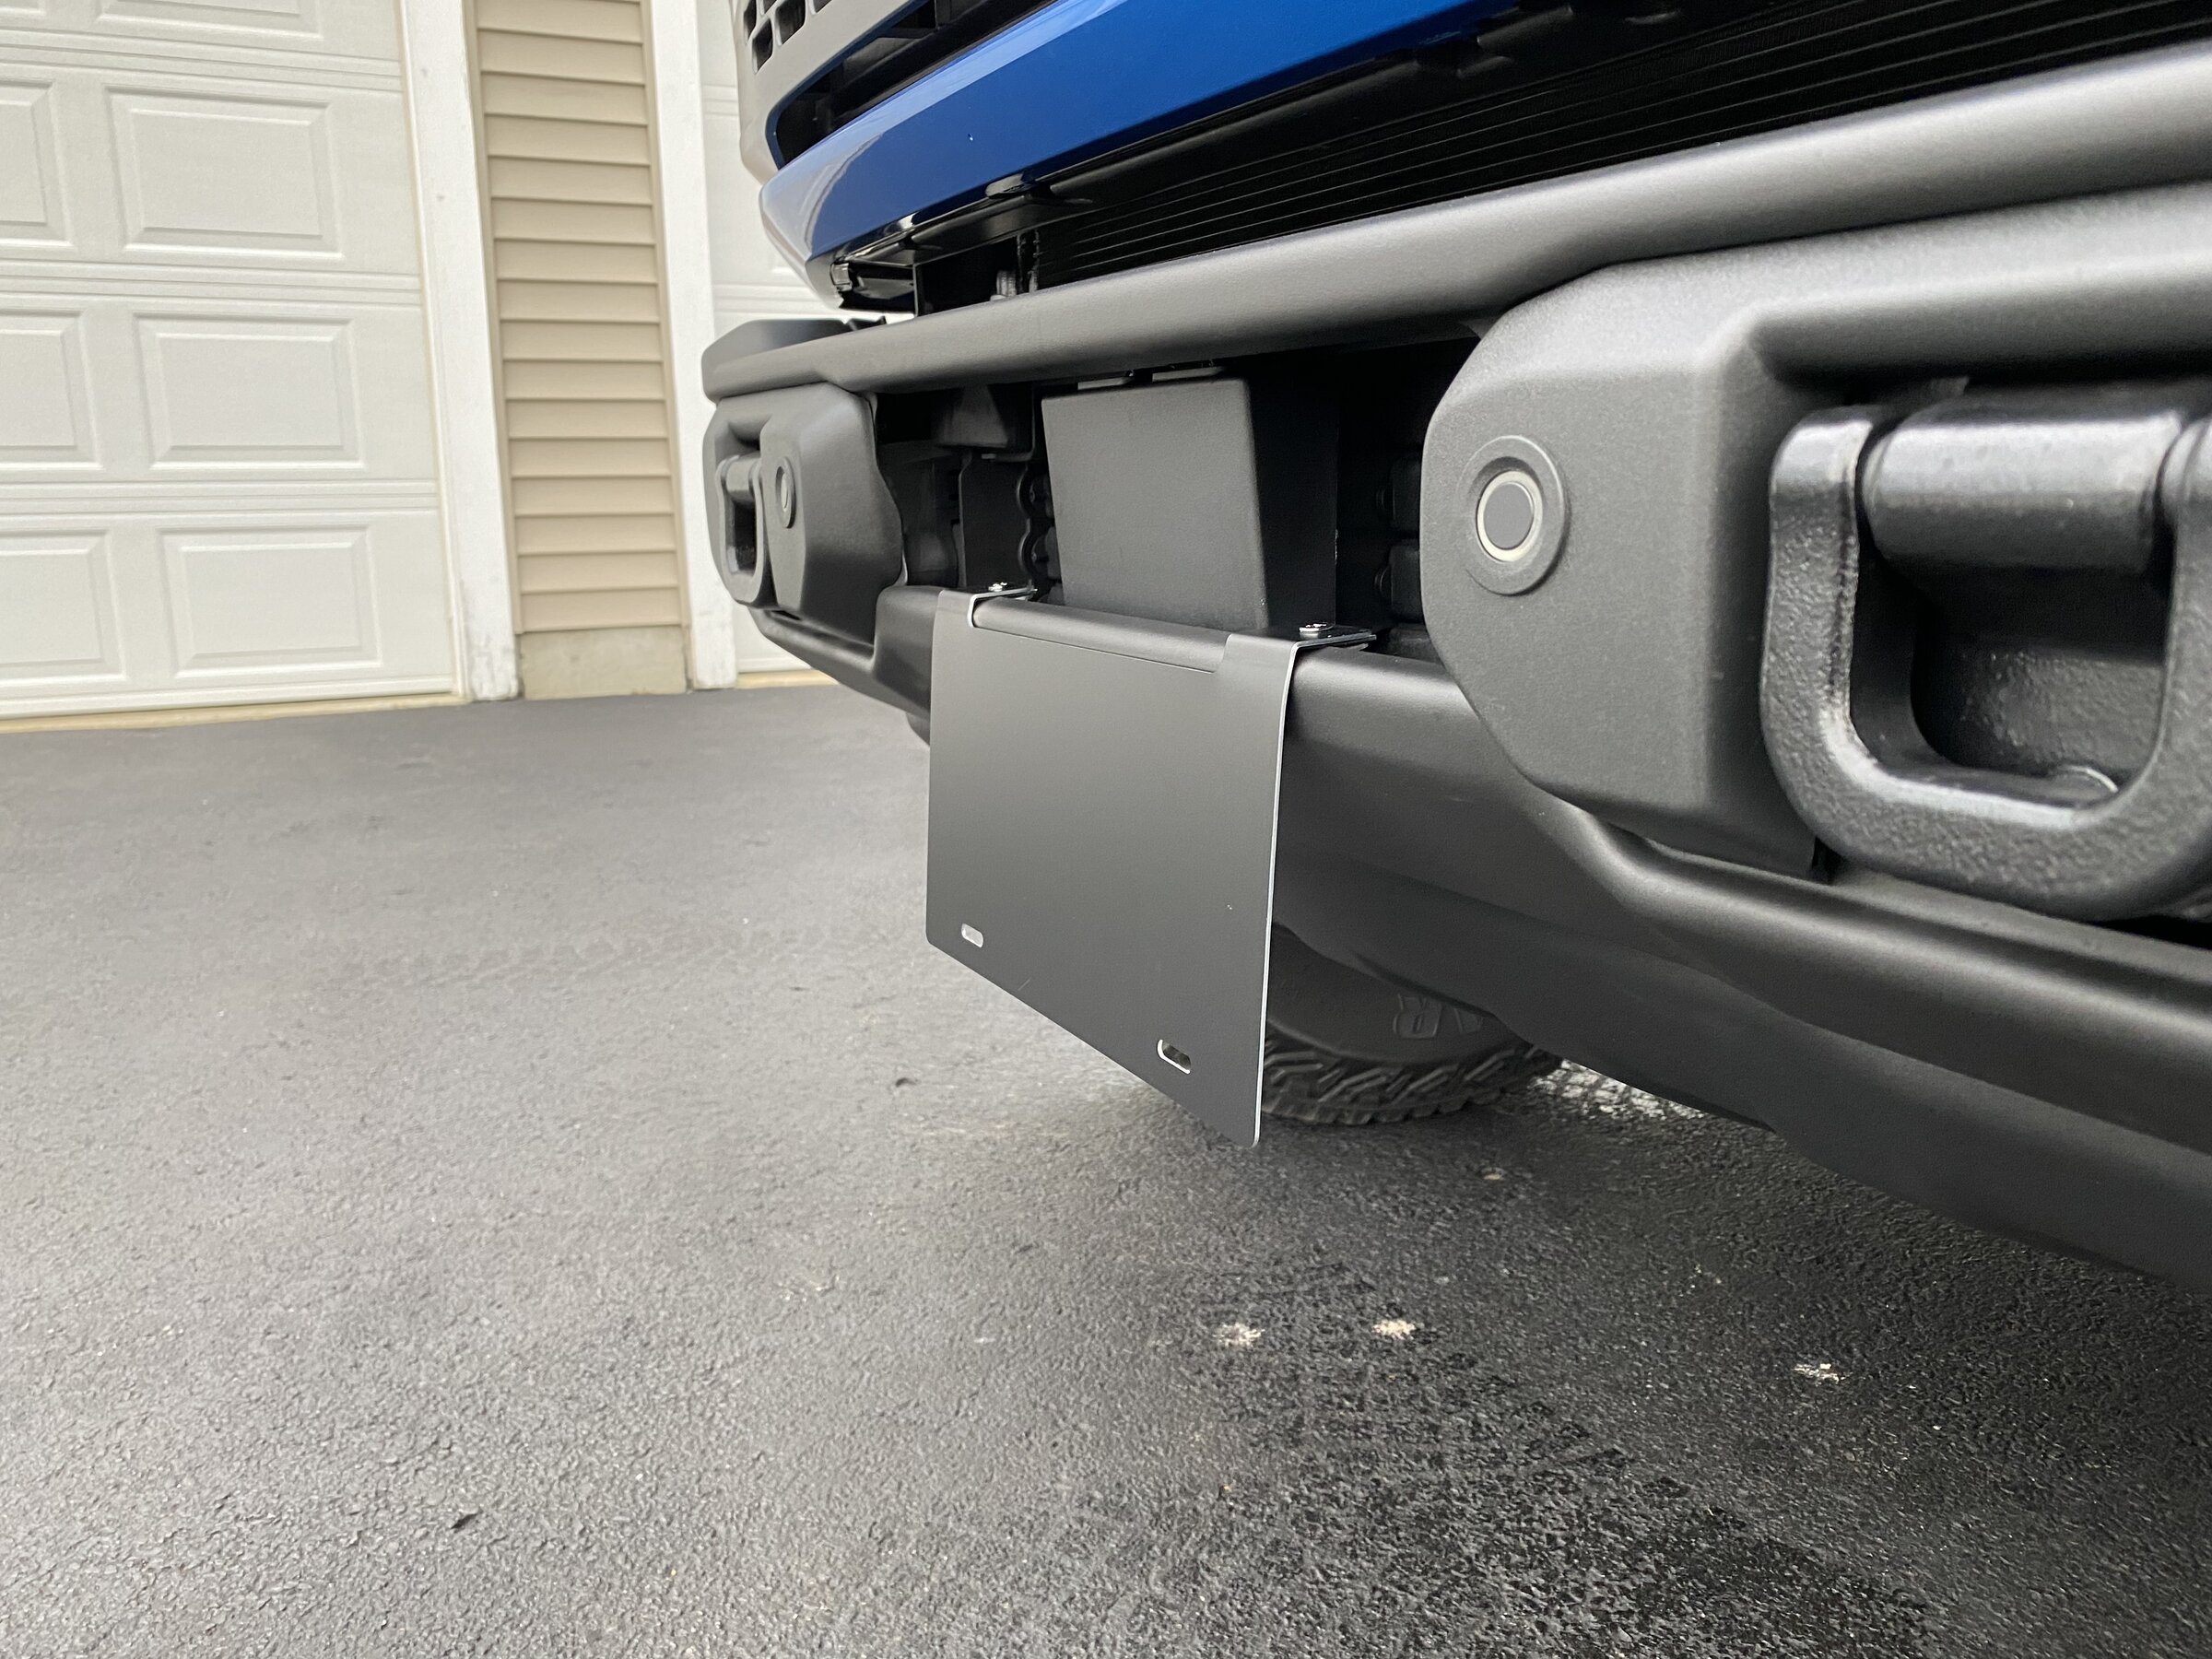 Ford Bronco PRICE DROP - Finally a Front License Plate bracket solution - order yours today 4406E872-CD3C-438C-9D80-EBDA0F6A5120